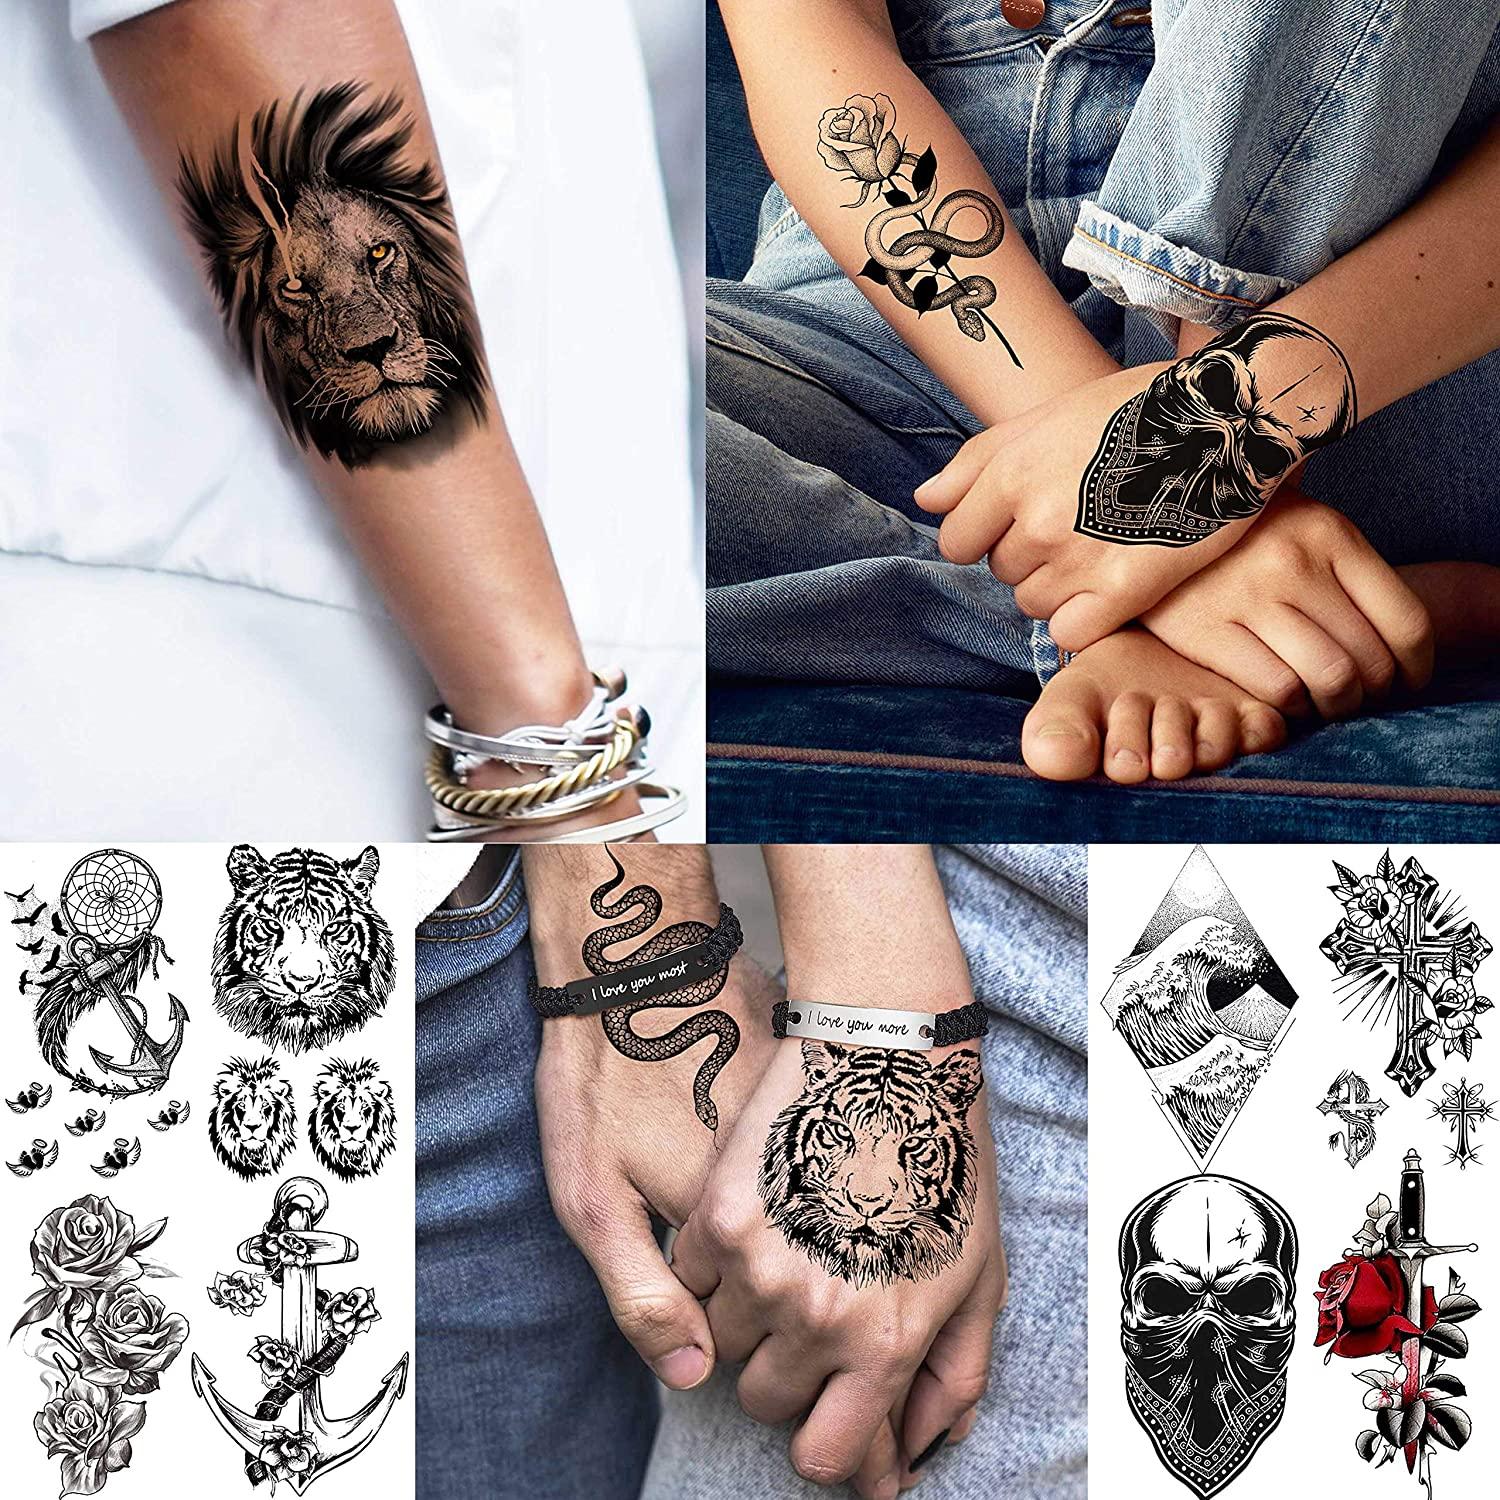 Buy Angry Lion Temporary Tattoo Sticker set of 2 Online in India - Etsy